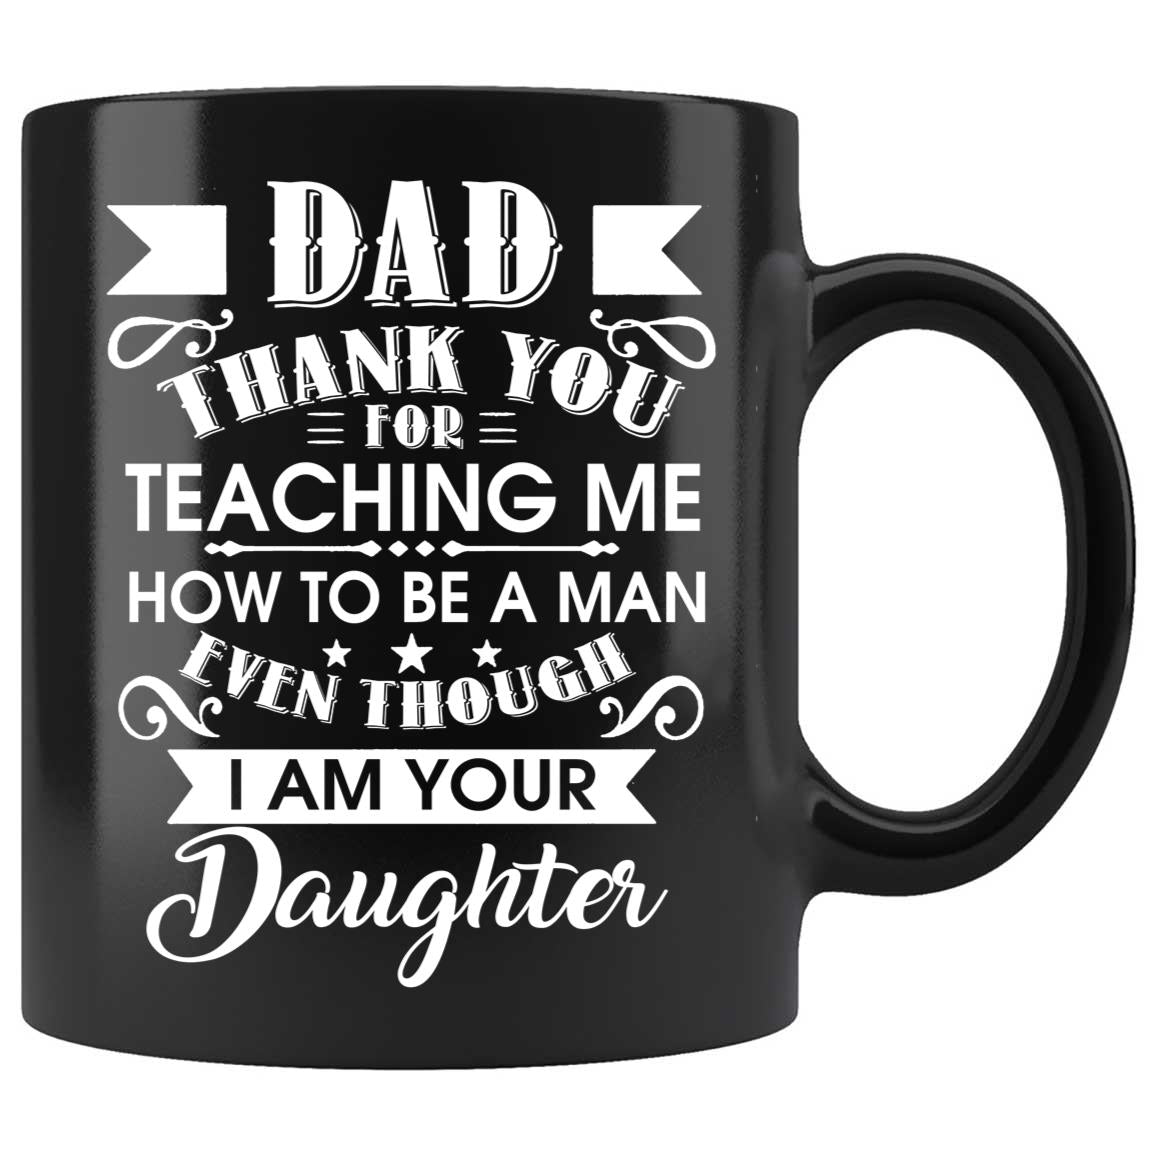 Skitongifts Coffee Mug Funny Ceramic Novelty M164 Dad, Thank You For Teaching Me To Be A Man Even Though I'm Your Daughter Lumbns0